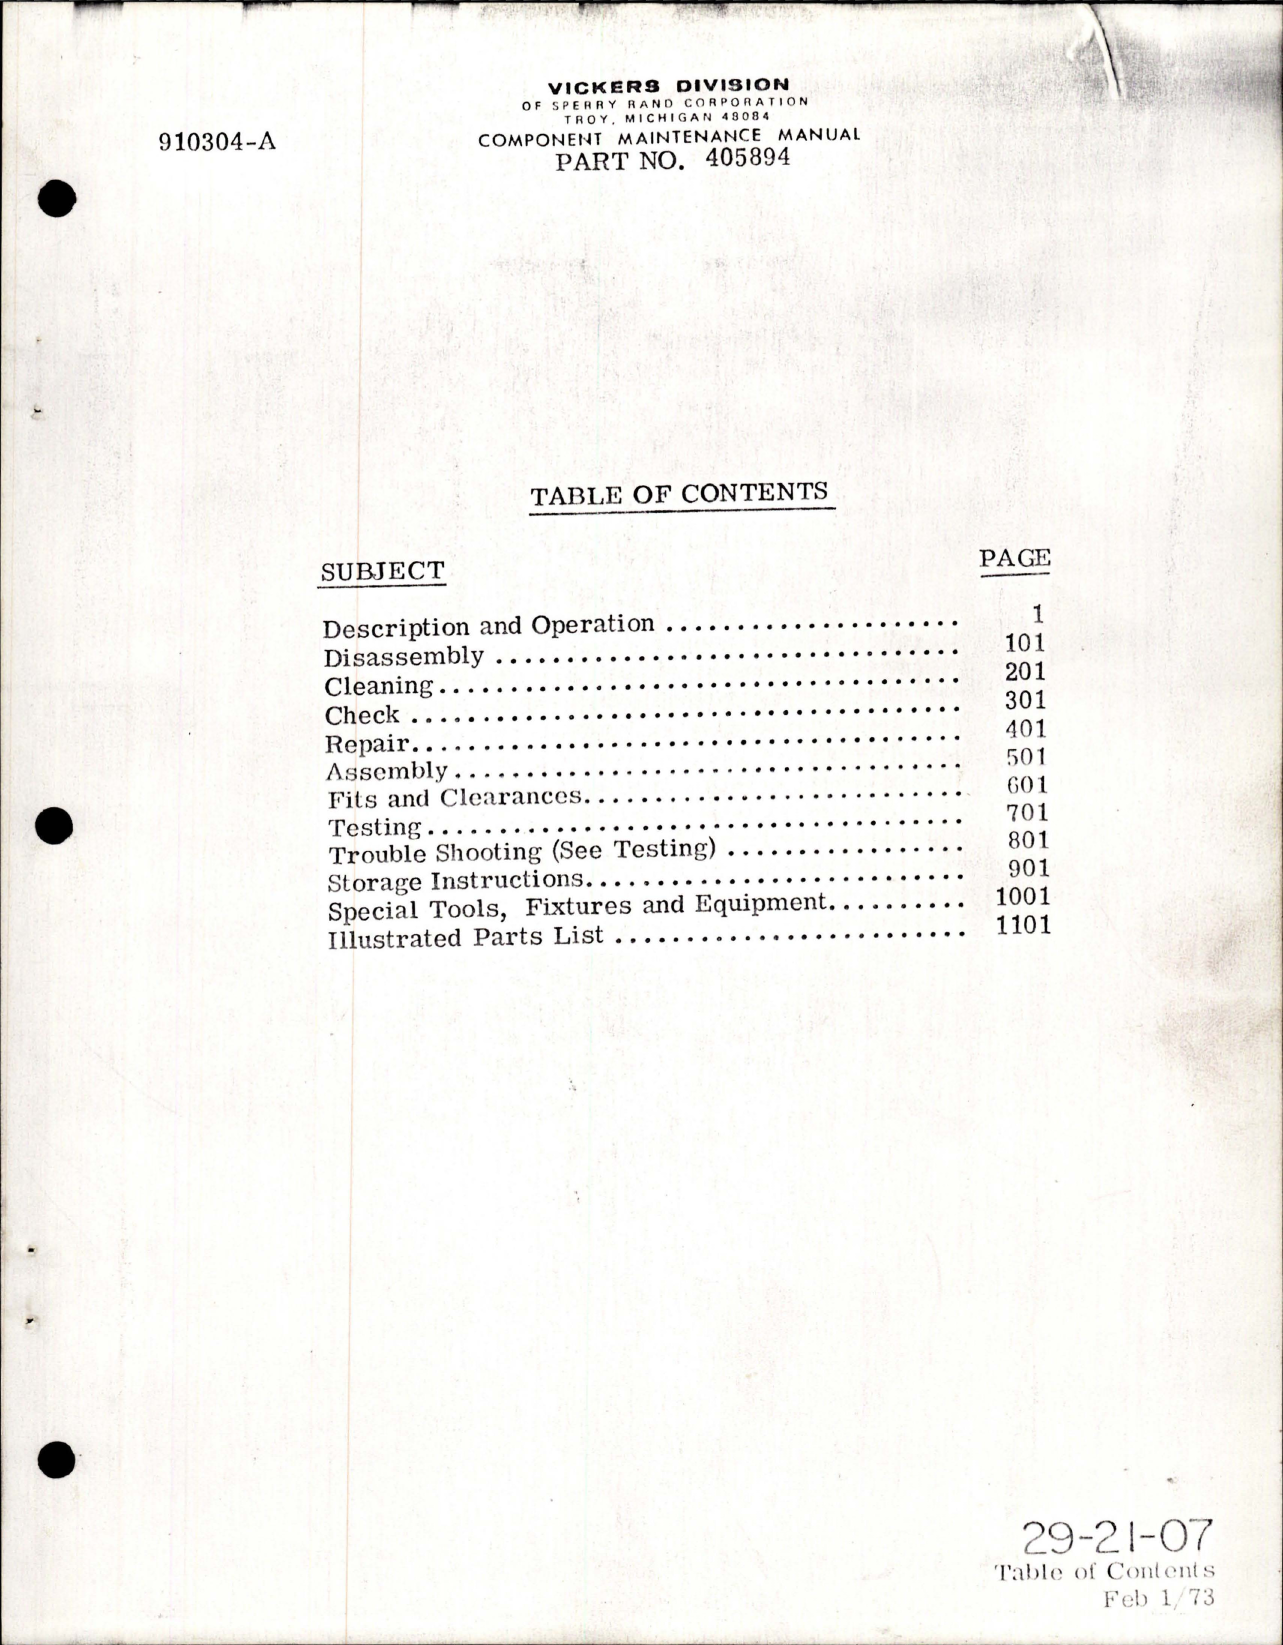 Sample page 7 from AirCorps Library document: Component Maintenance Manual for Hydraulic Pump - Part 405894 